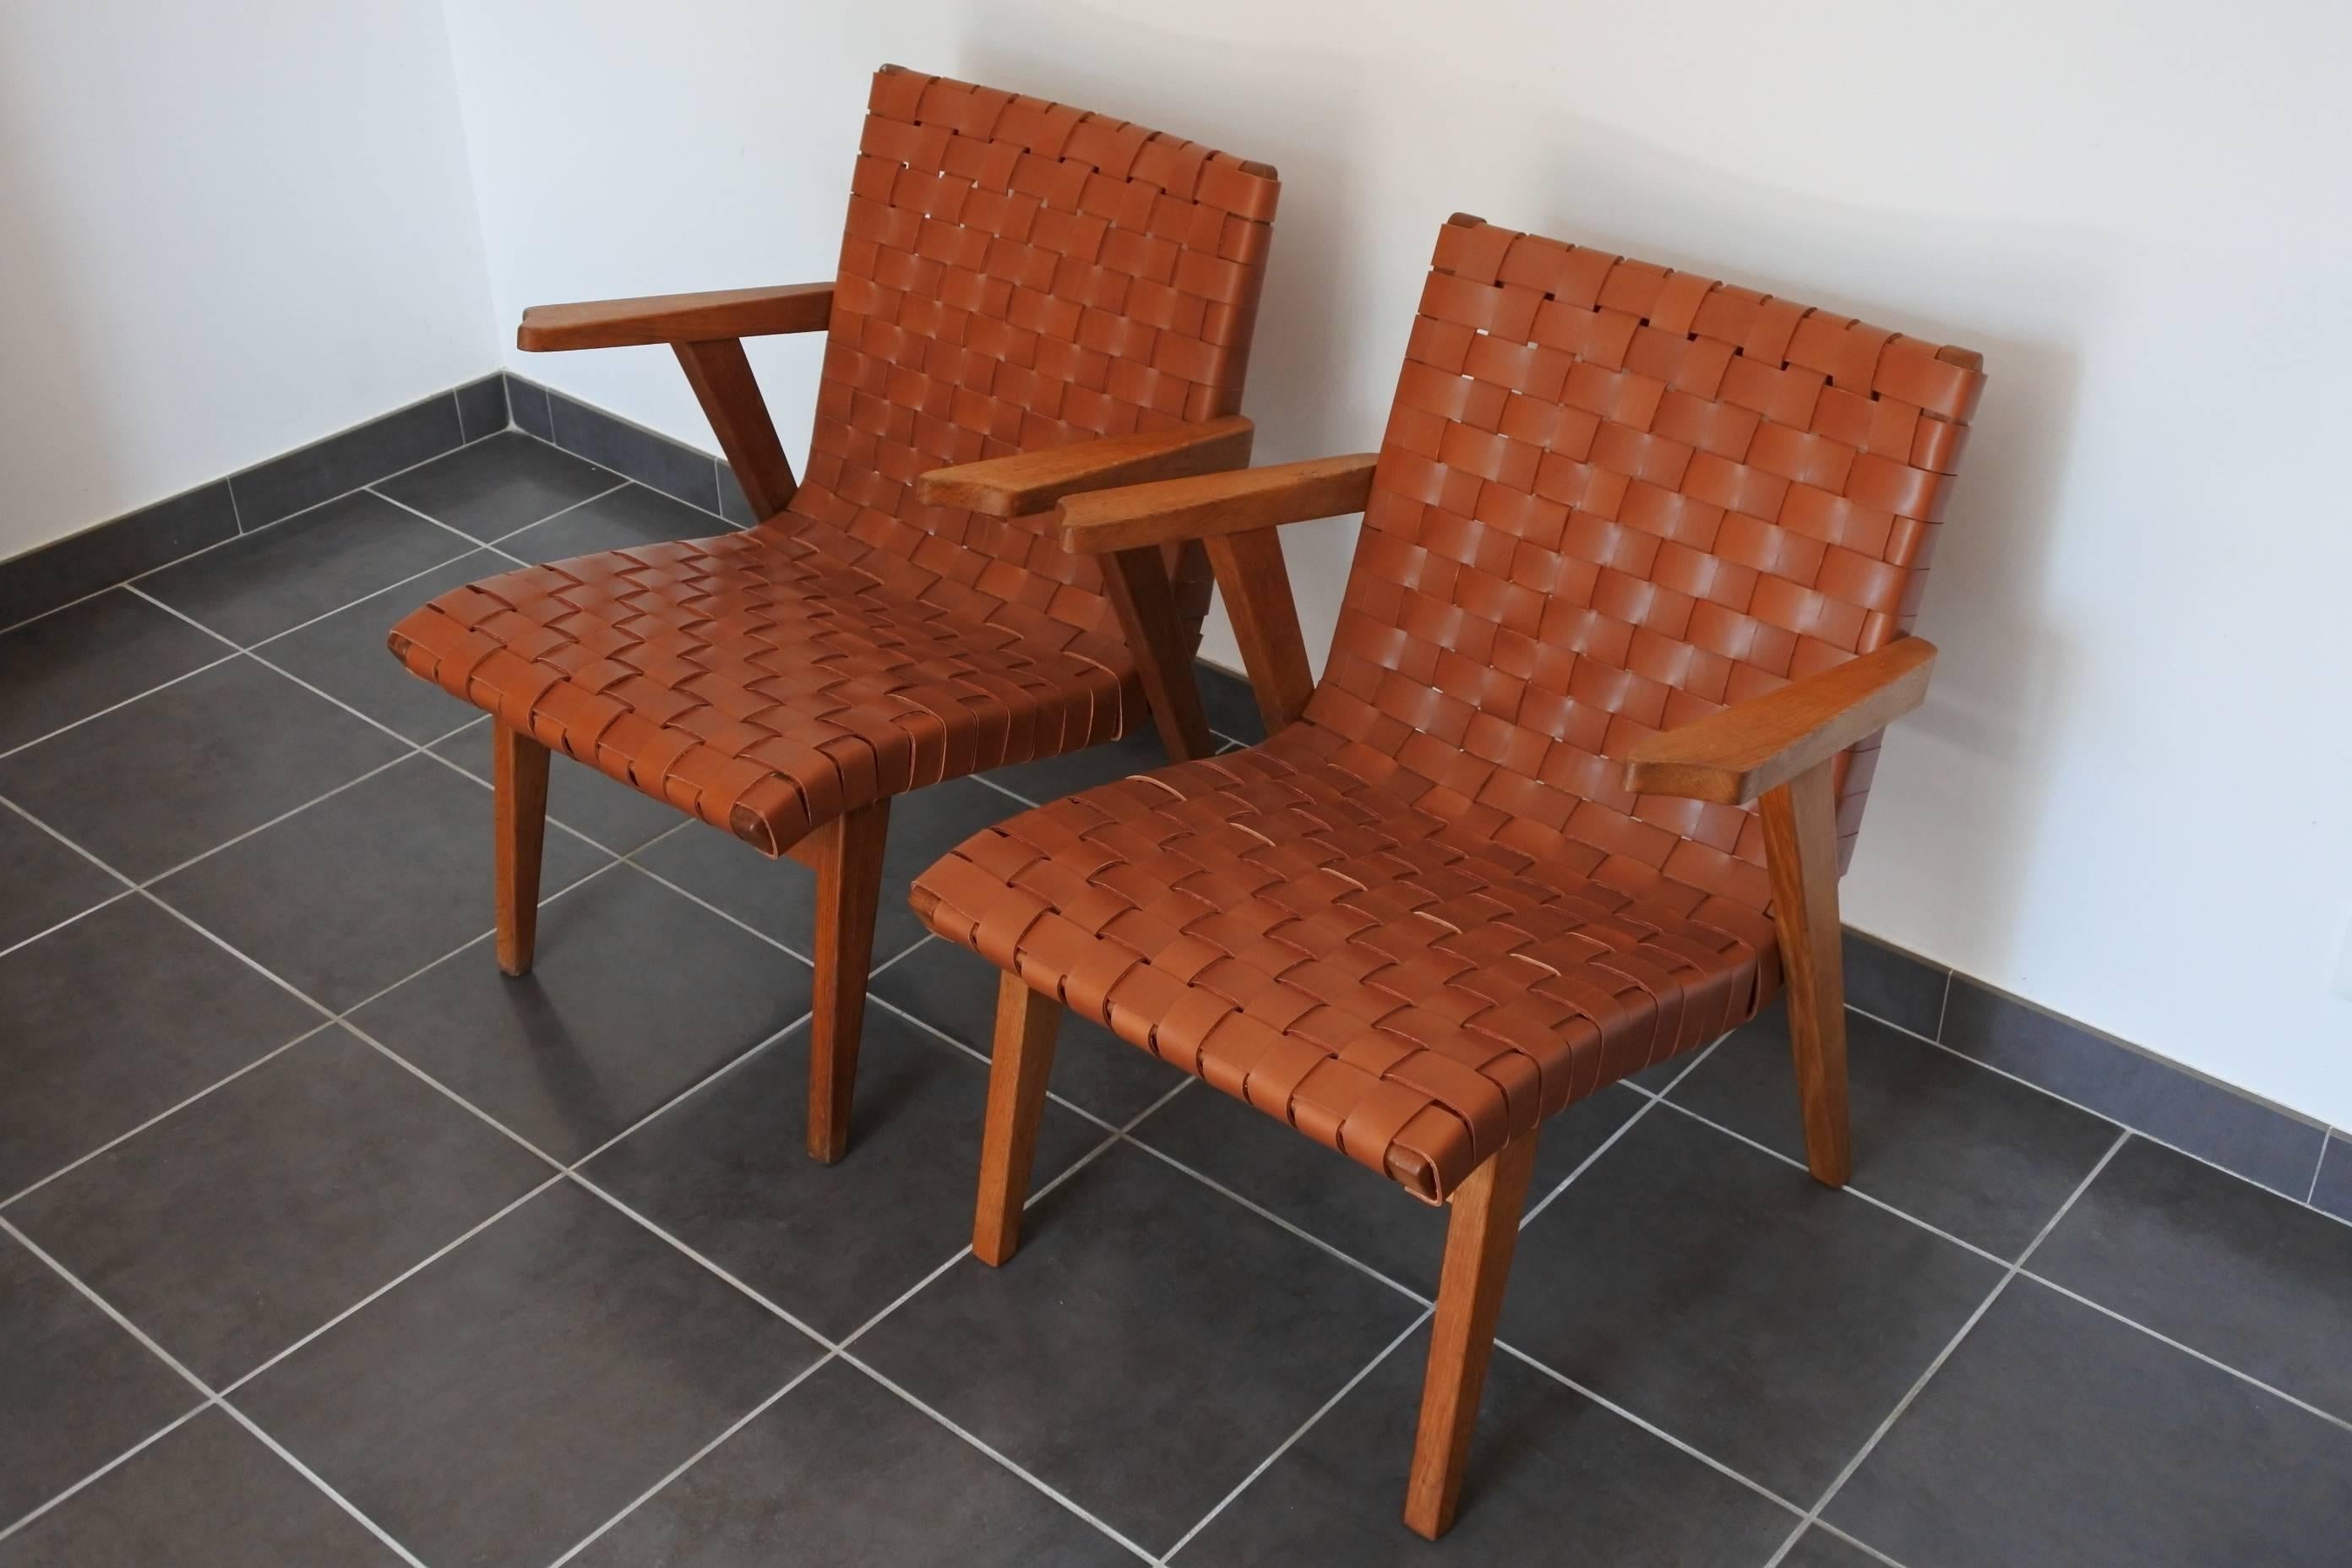 Pair of armchairs by Jens Risom for Knoll International, France.
Solid oak wood and leather straps.
Knoll produced the Risom furniture in oak wood only in France.
New leather webbing.
Even though the chairs have the same provenance, one shows